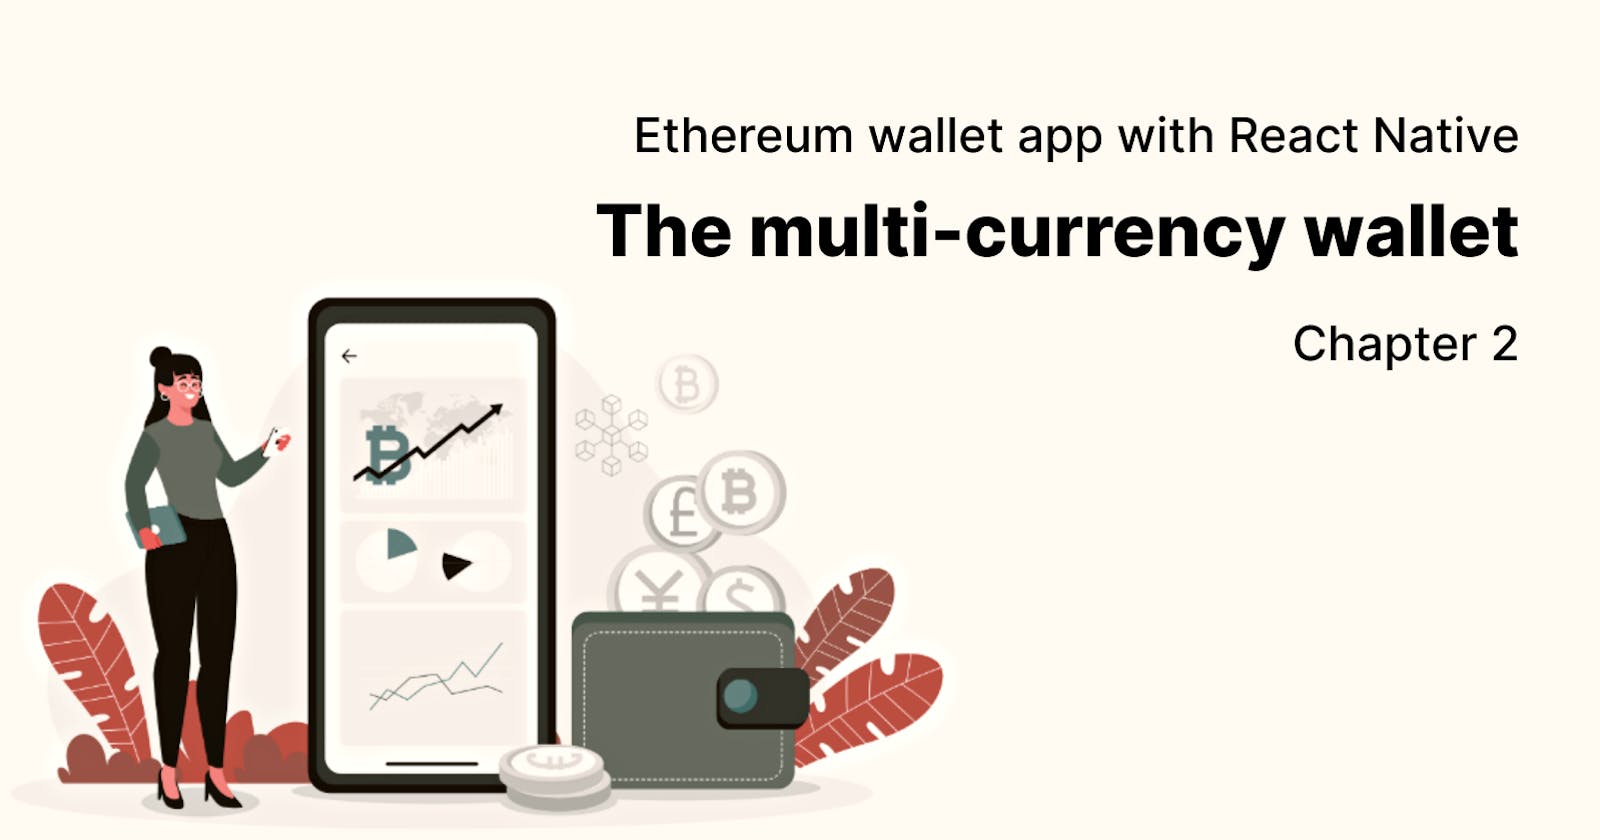 How to build an Ethereum wallet app with React Native | Chapter 2 | The multi-currency wallet